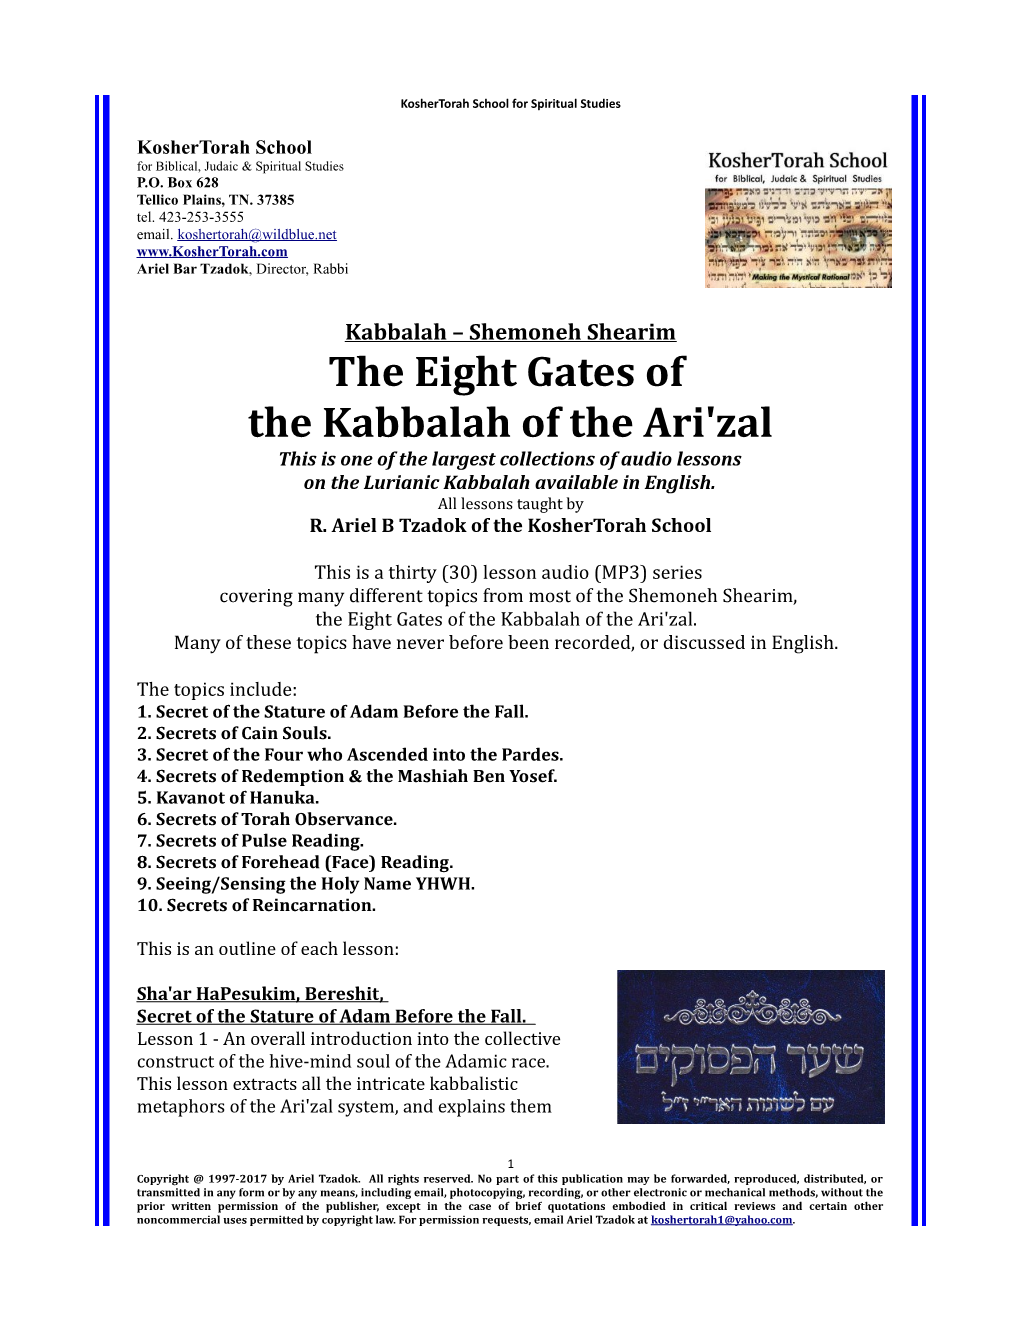 The Eight Gates of the Kabbalah of the Ari'zal the Most Comprehensive